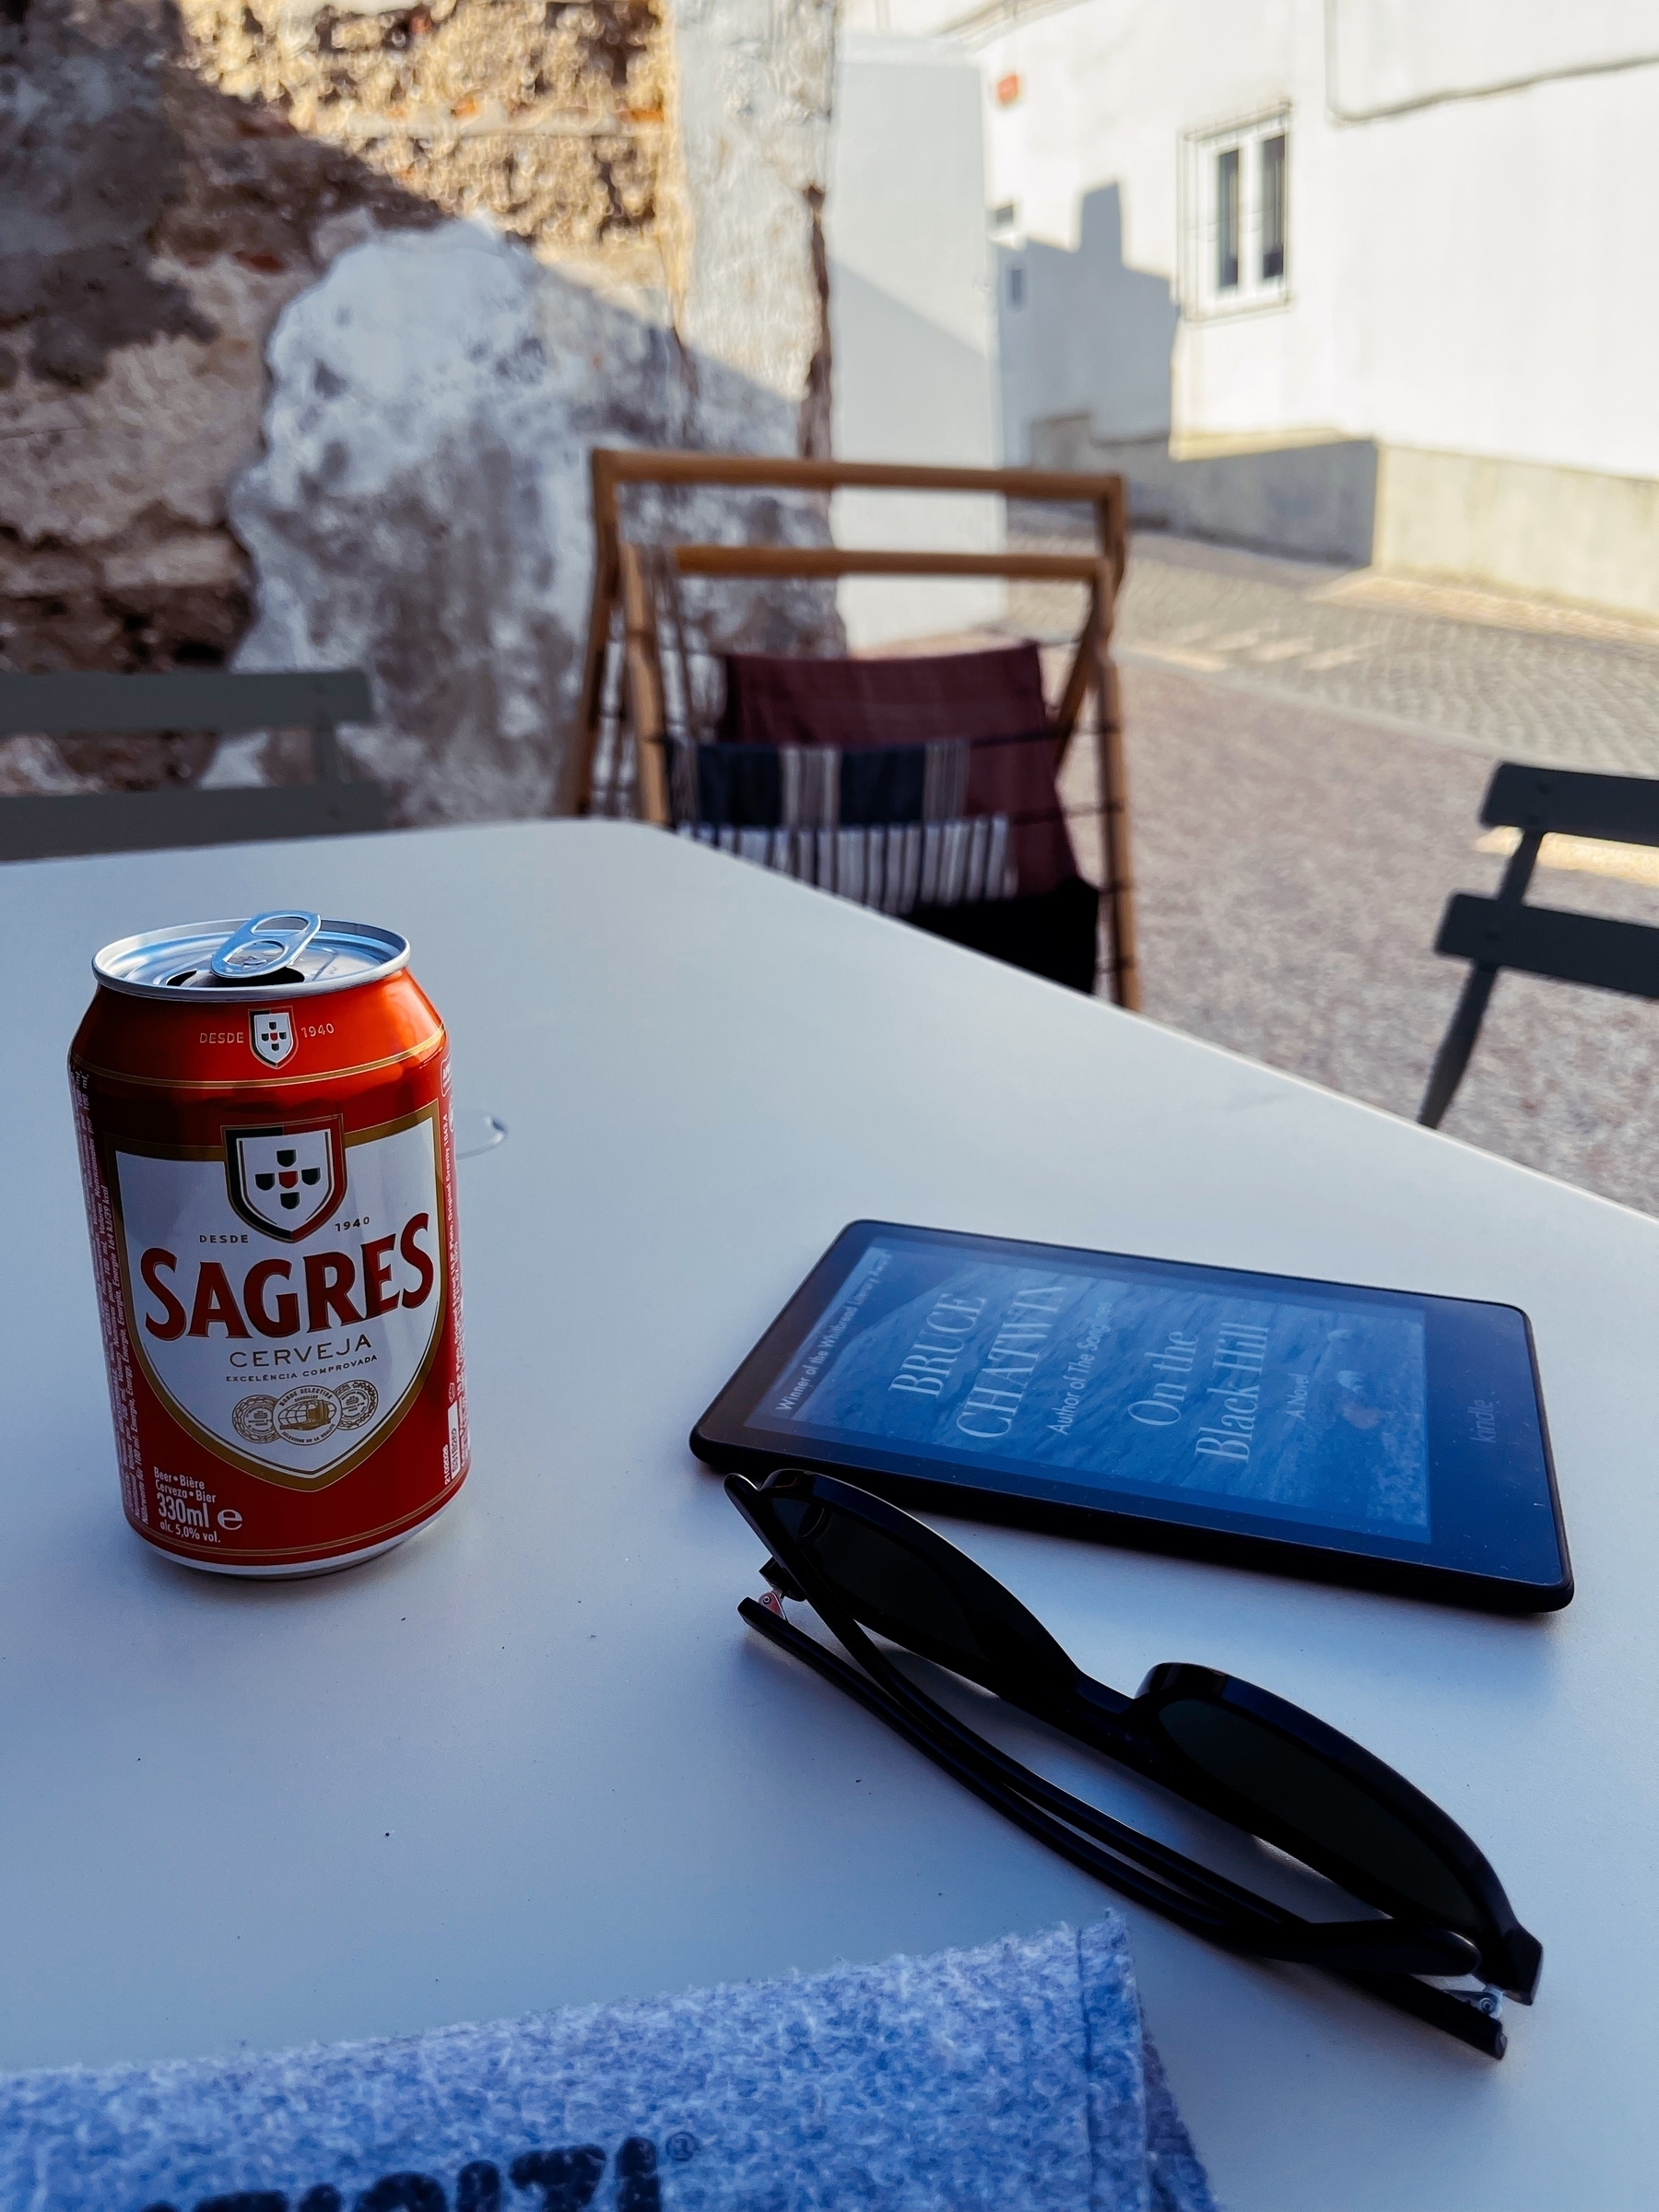 Sitting outside next to a table with my Kindle in it, along with sun glasses, a can of beer, and a soft glasses case. Laundry is hanging on a clothes horse, just out of focus. 